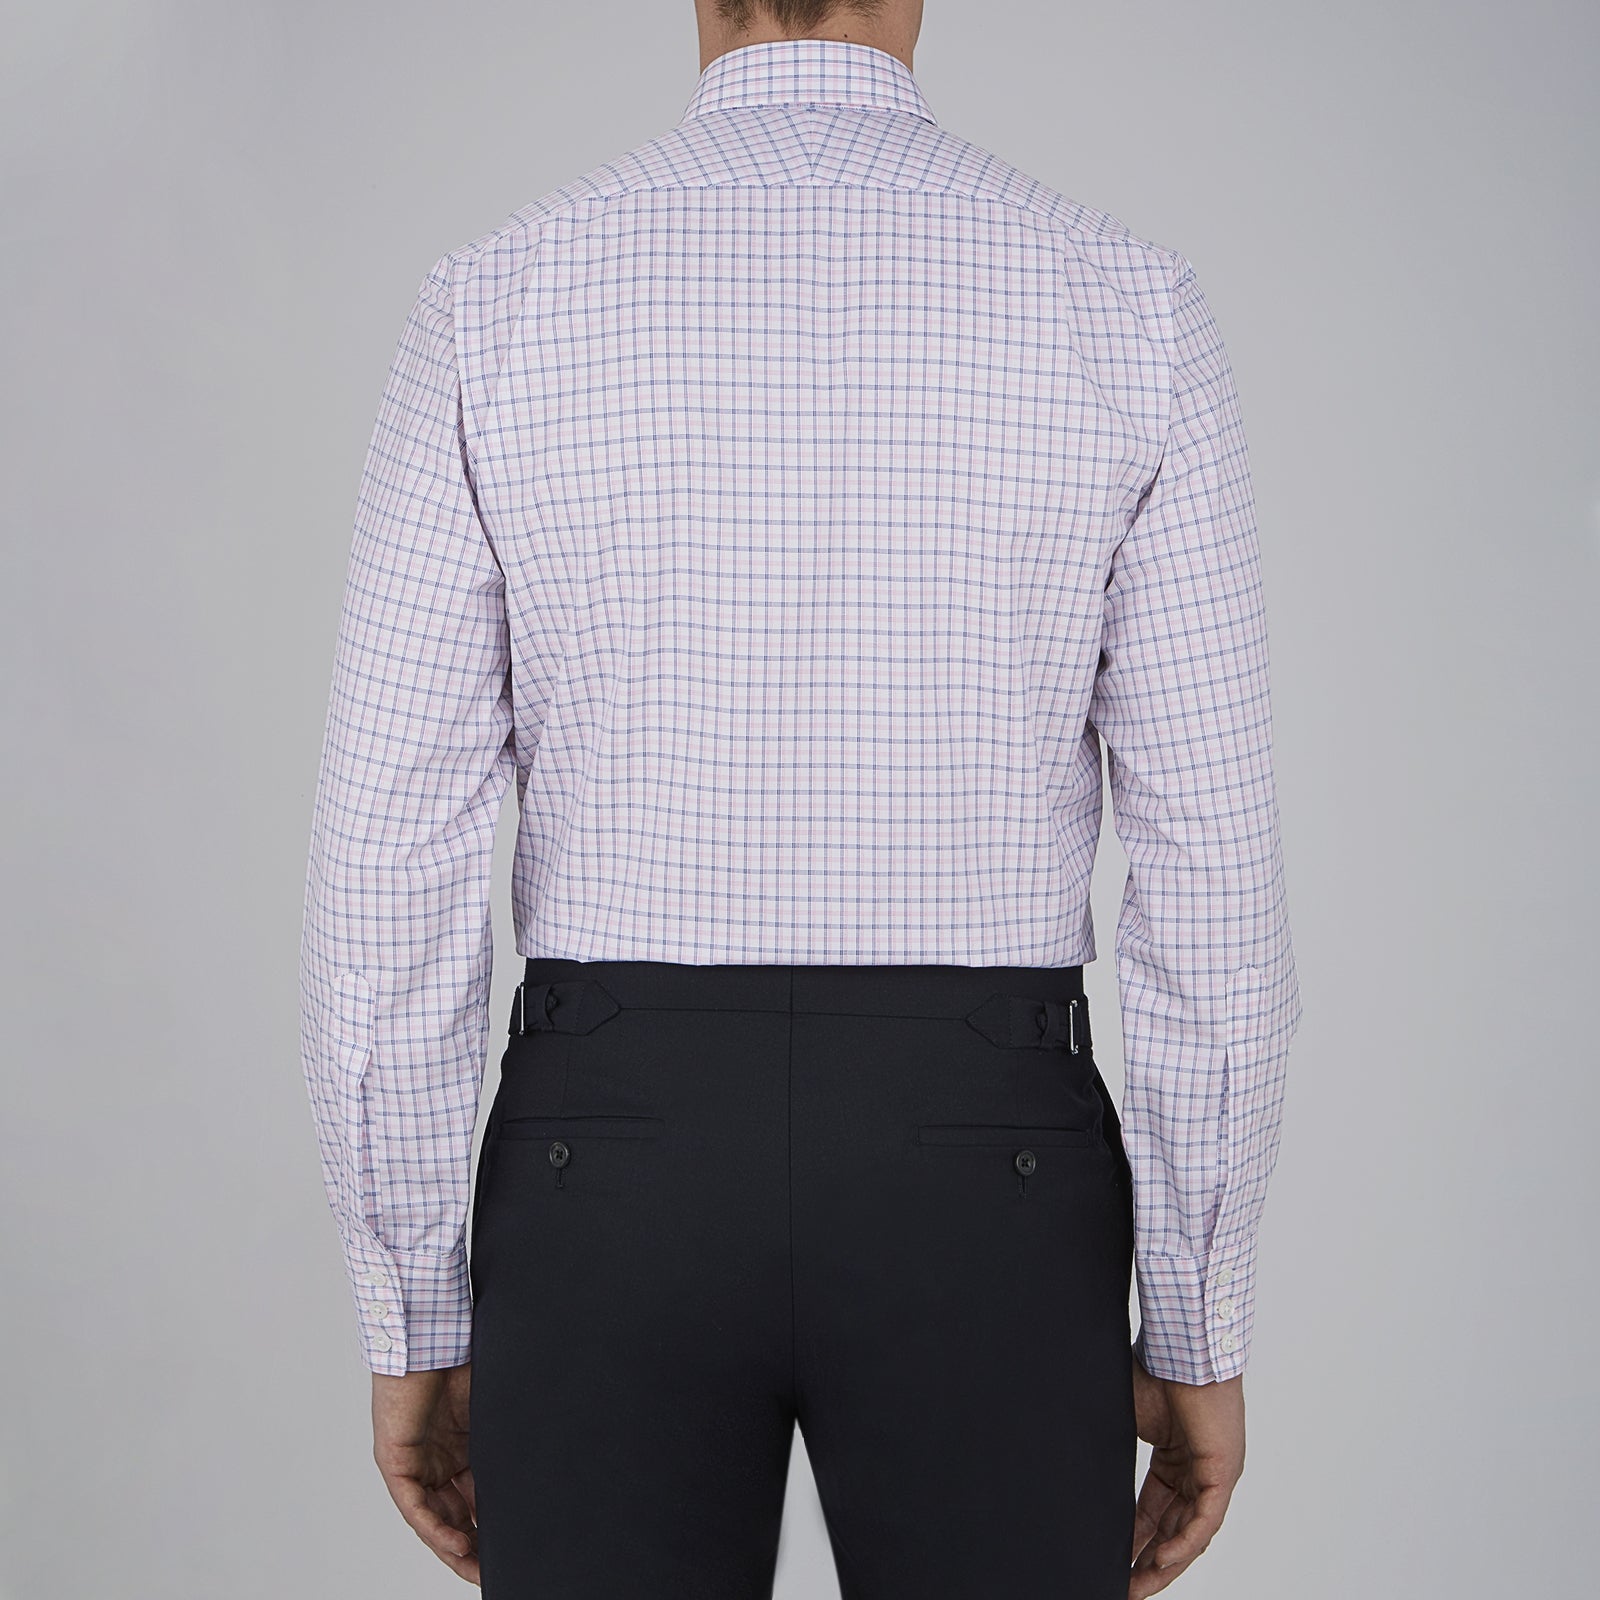 Pink and White Shadow Check Shirt with Classic T&A Collar and Button Cuffs